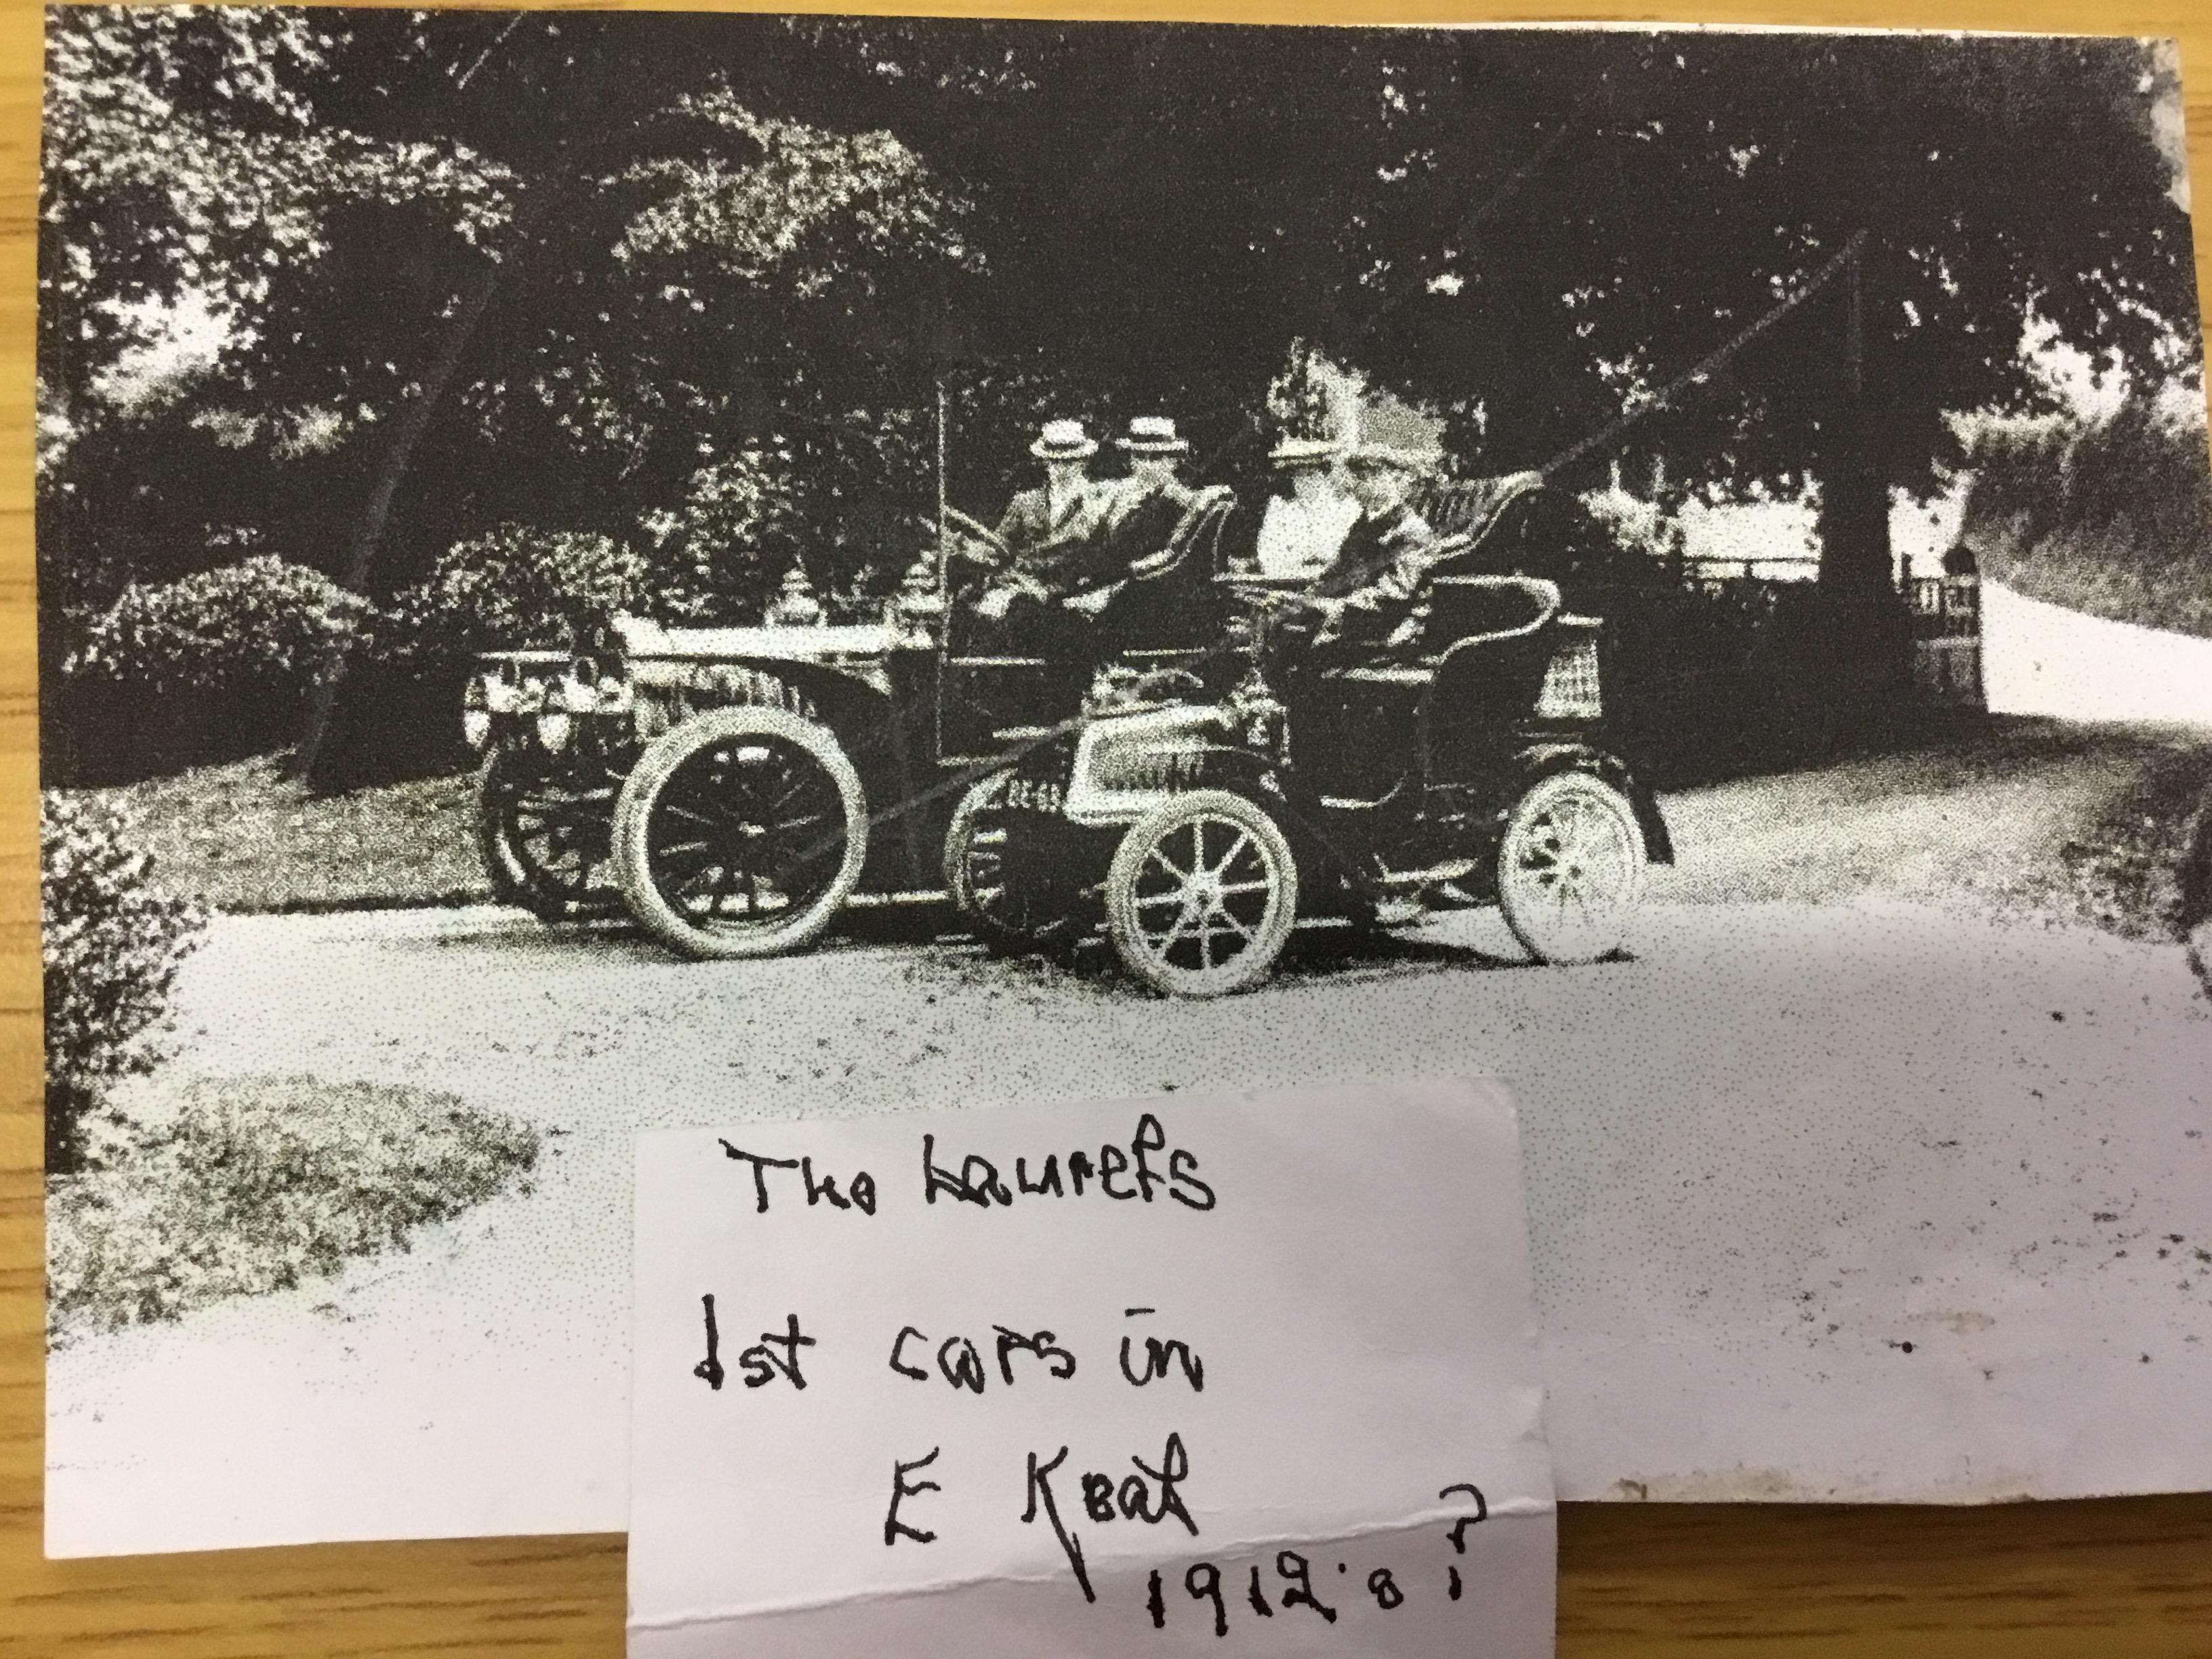 Are these the first cars in East Keal